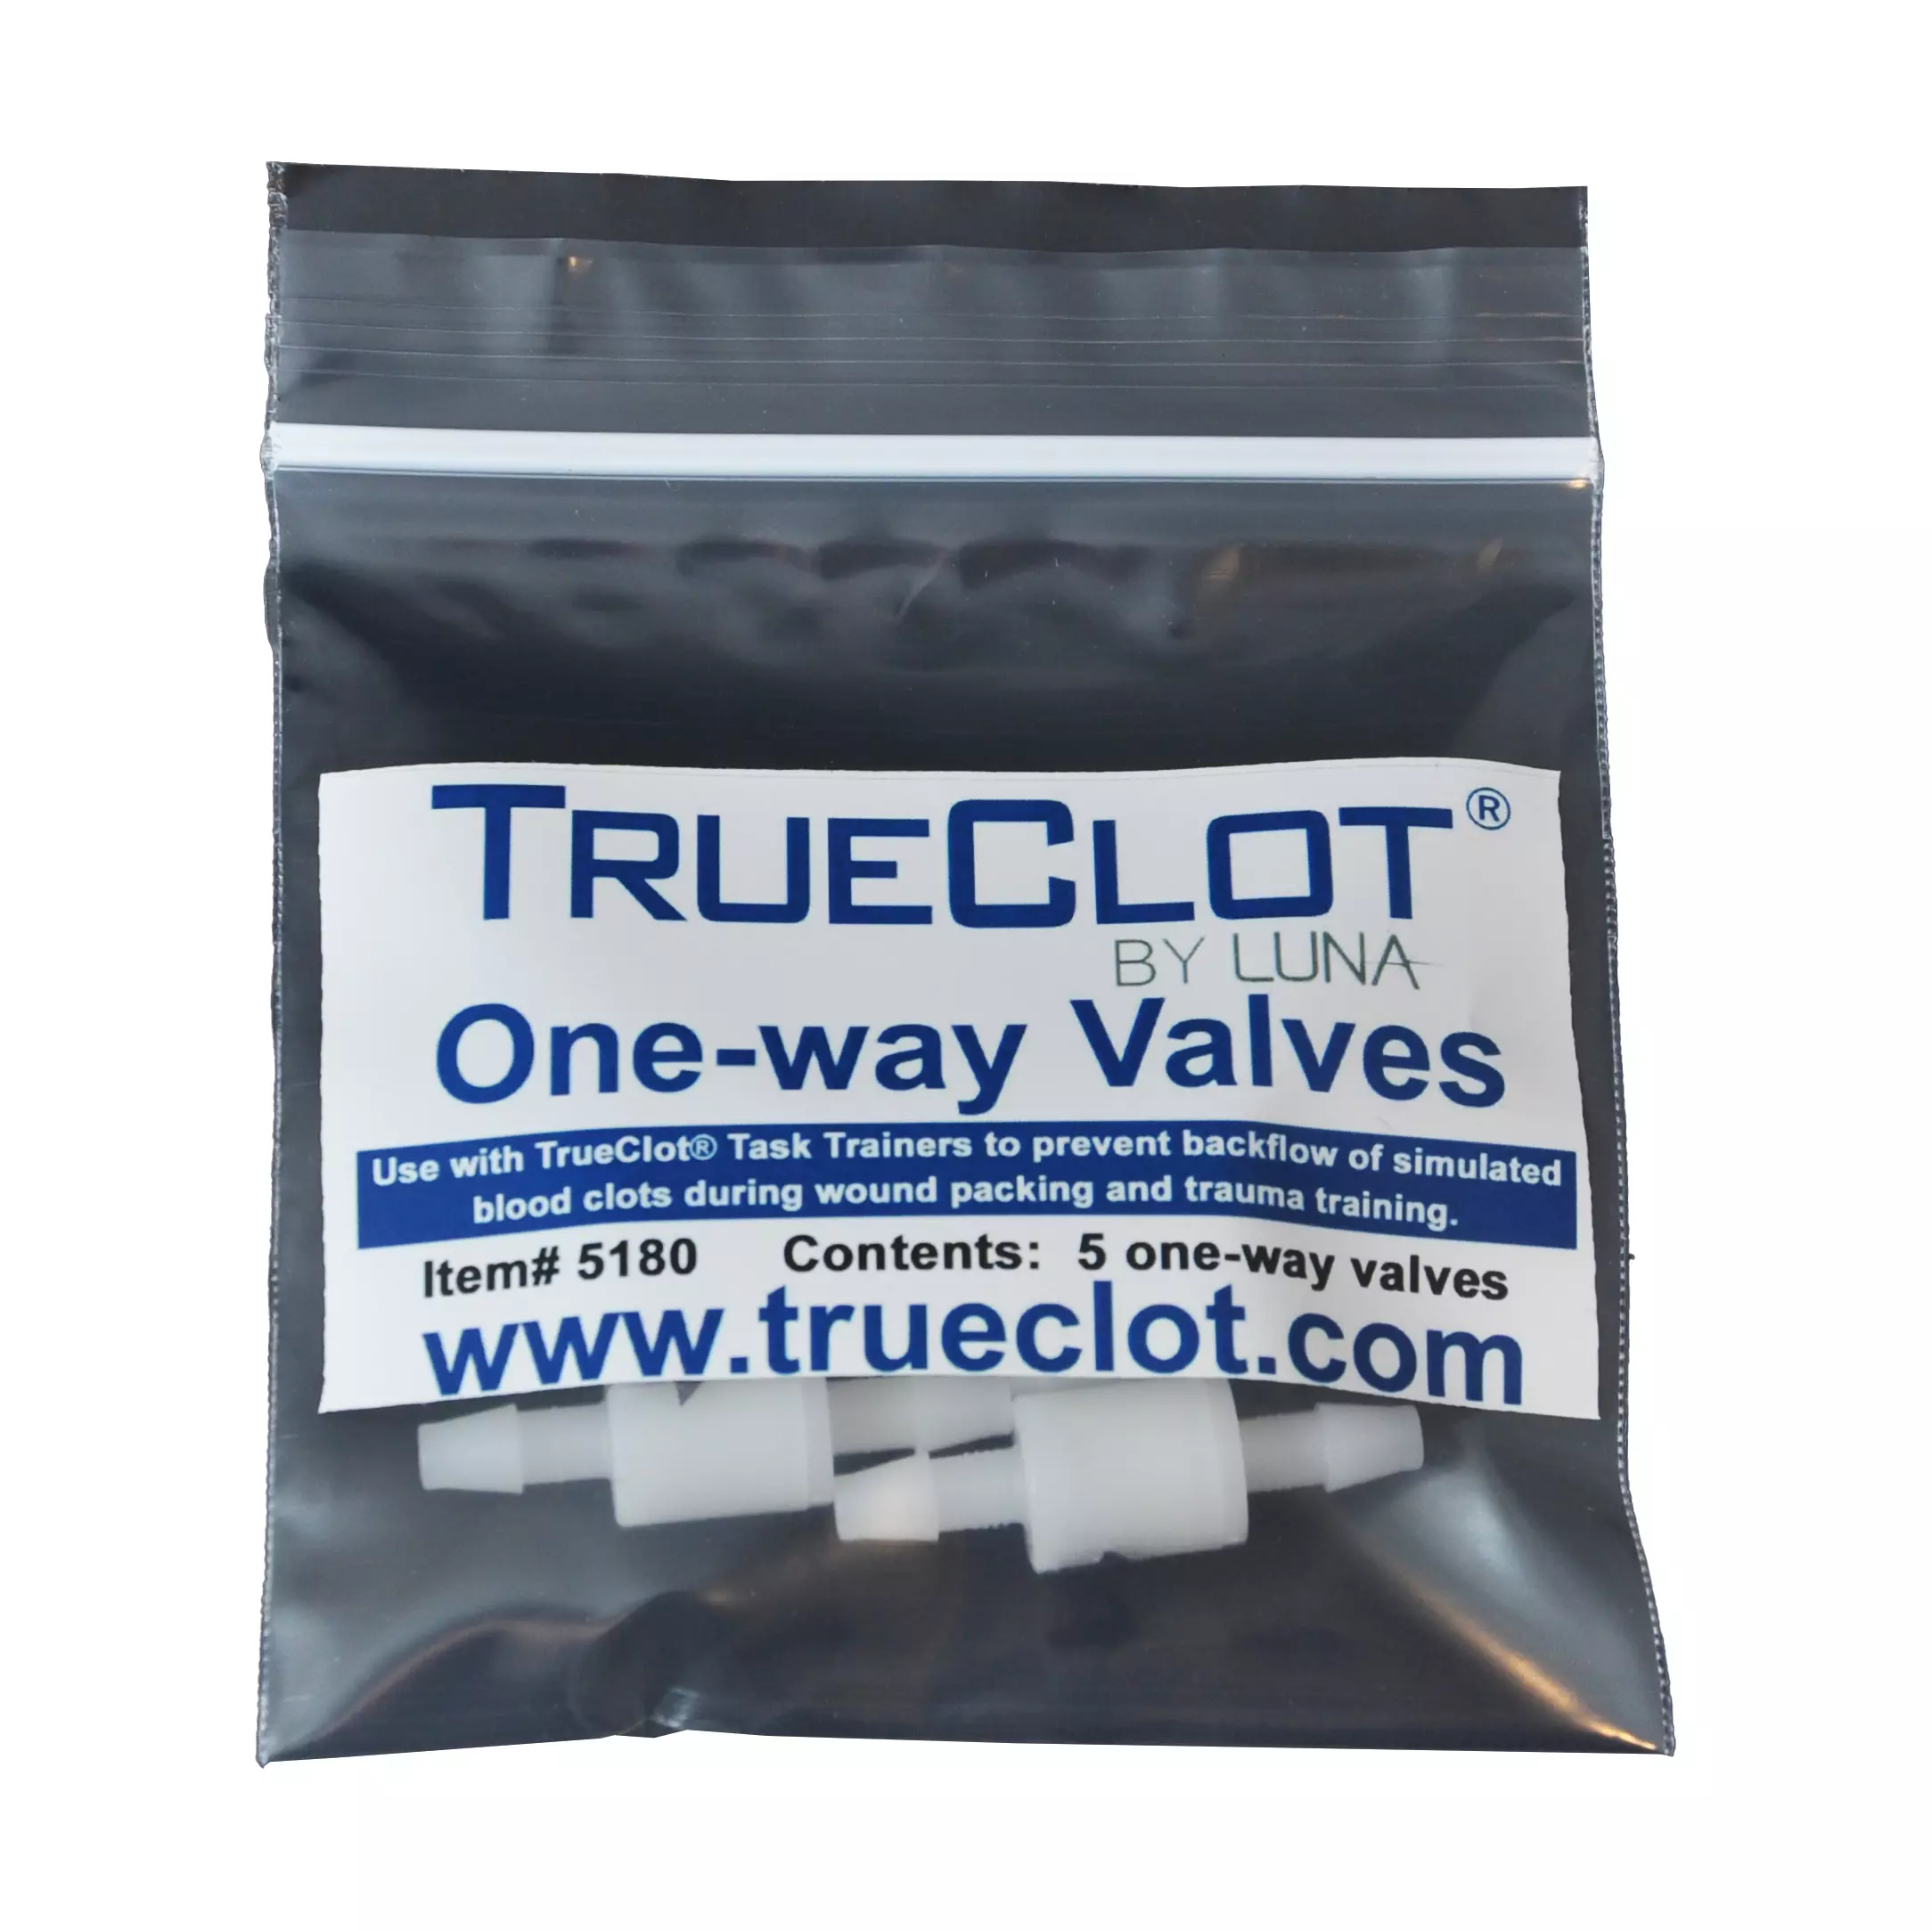 Replacement one-way valves for TrueClot Task Trainer 5 pcs./pkg.